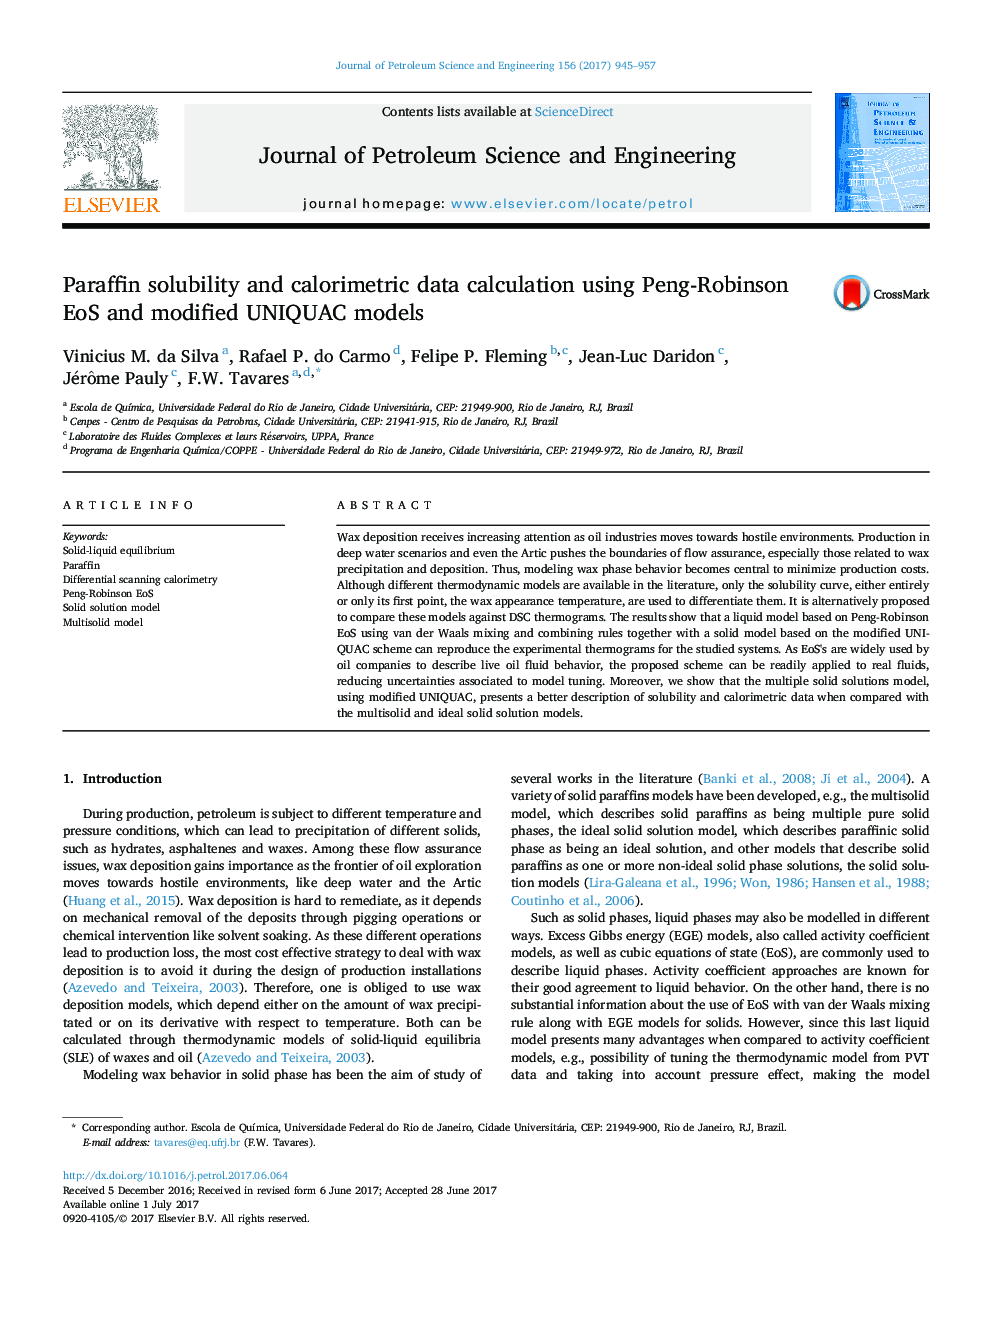 Paraffin solubility and calorimetric data calculation using Peng-Robinson EoS and modified UNIQUAC models